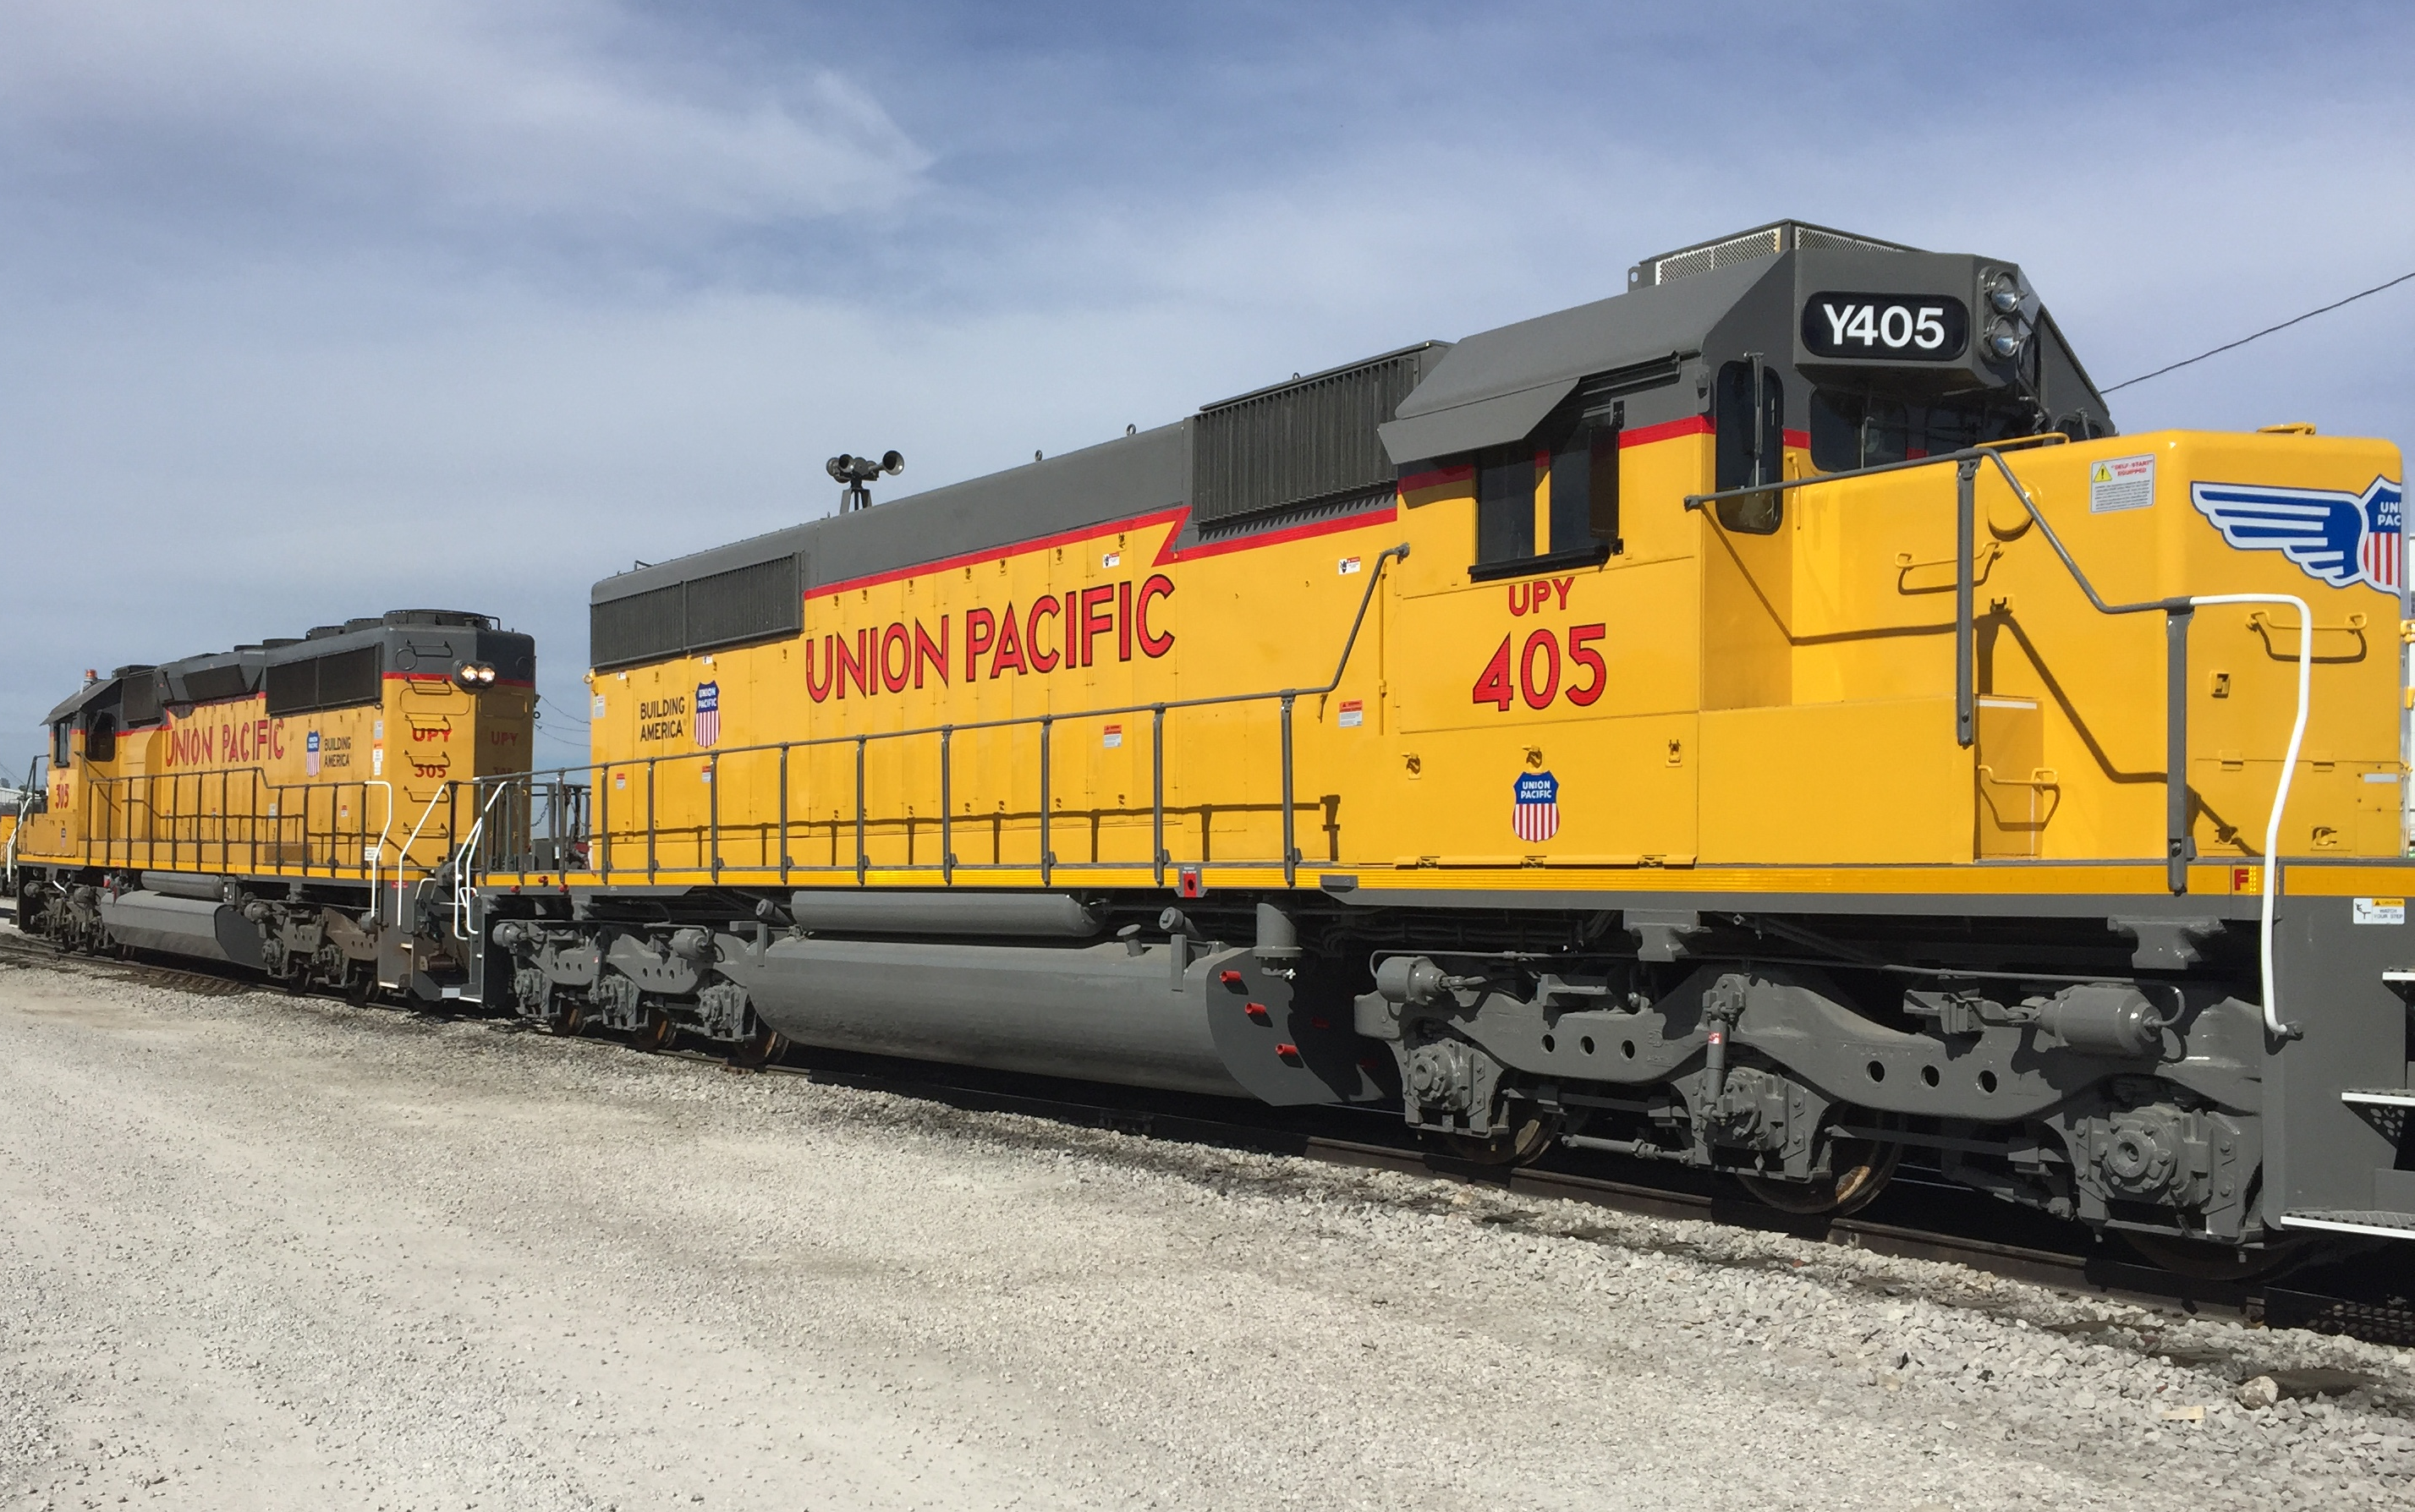 The hybrid-electric locomotives, which will be equipped with ZTR-supplied batteries, power electronics and controls, will be built at UP's Little Rock, Ark., facility. (UP photo)